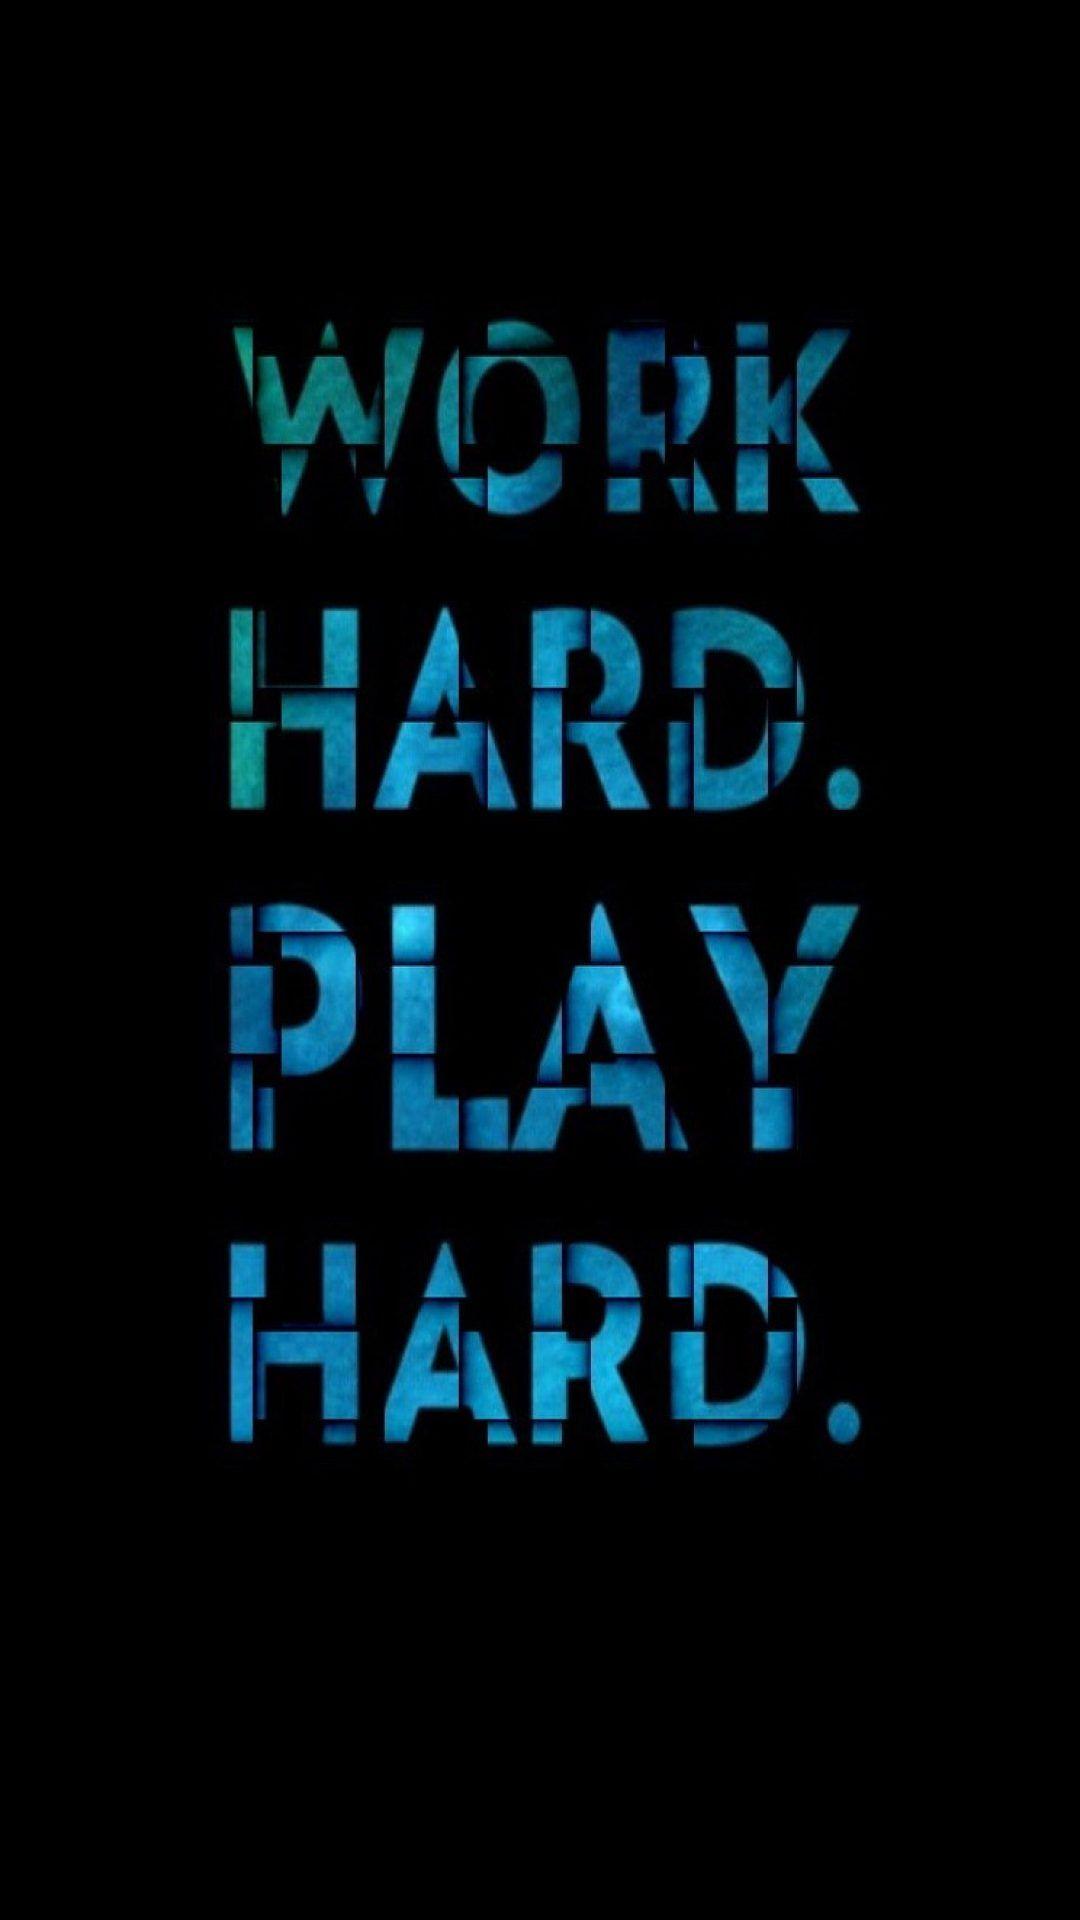 Inspirational Quotes Wallpaper for Mobile (6 of 20) Hard Play Hard Wallpaper. Wallpaper Download. High Resolution Wallpaper. Inspirational quotes wallpaper, Inspirational quotes, Quote iphone